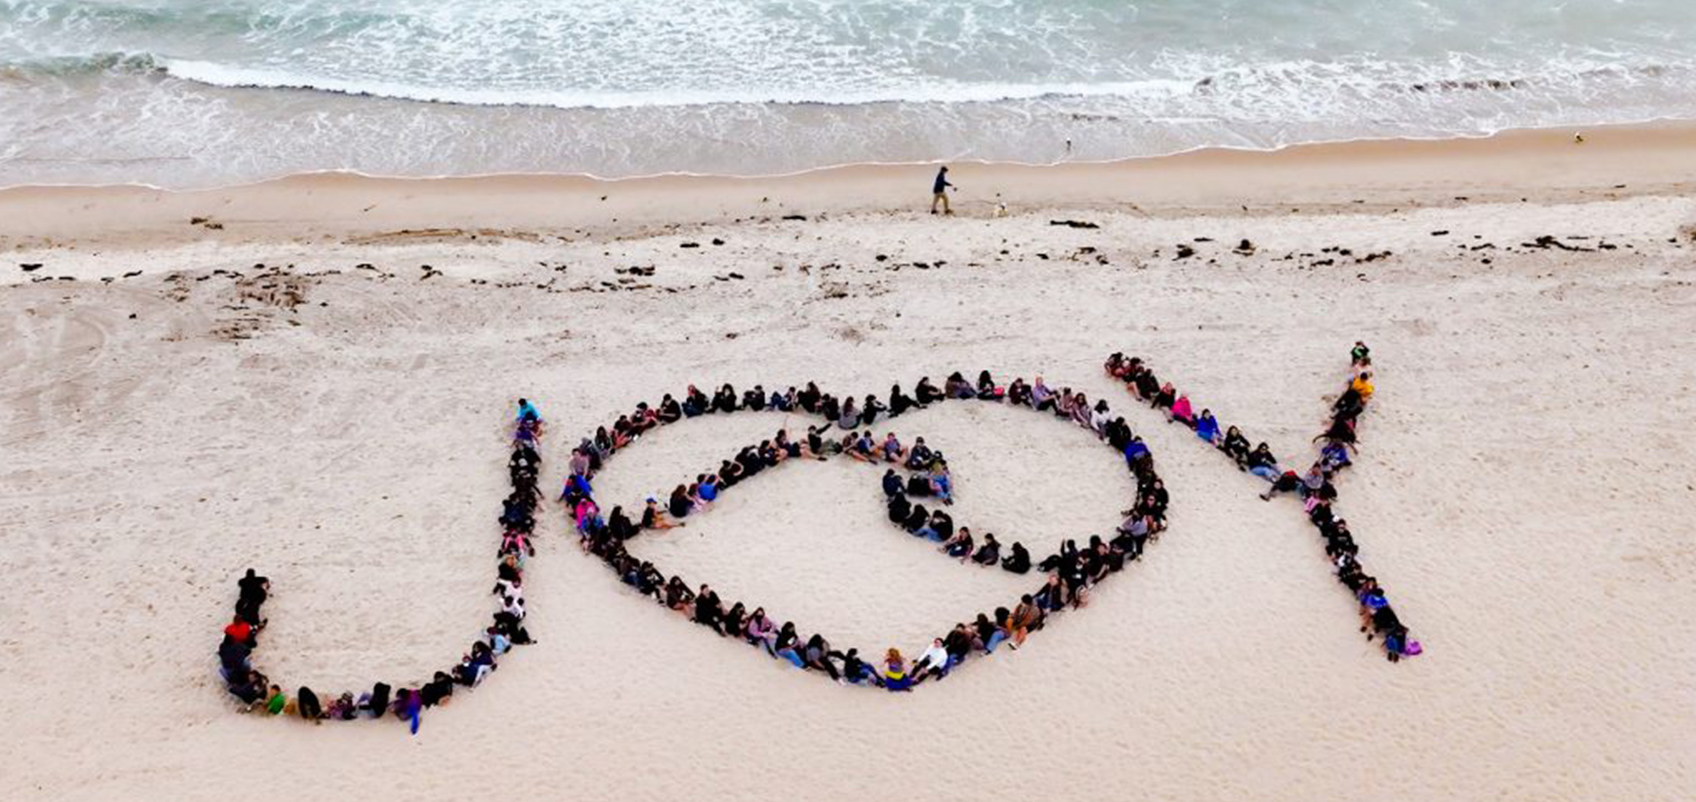 People are lined up on the beach making the word JOY